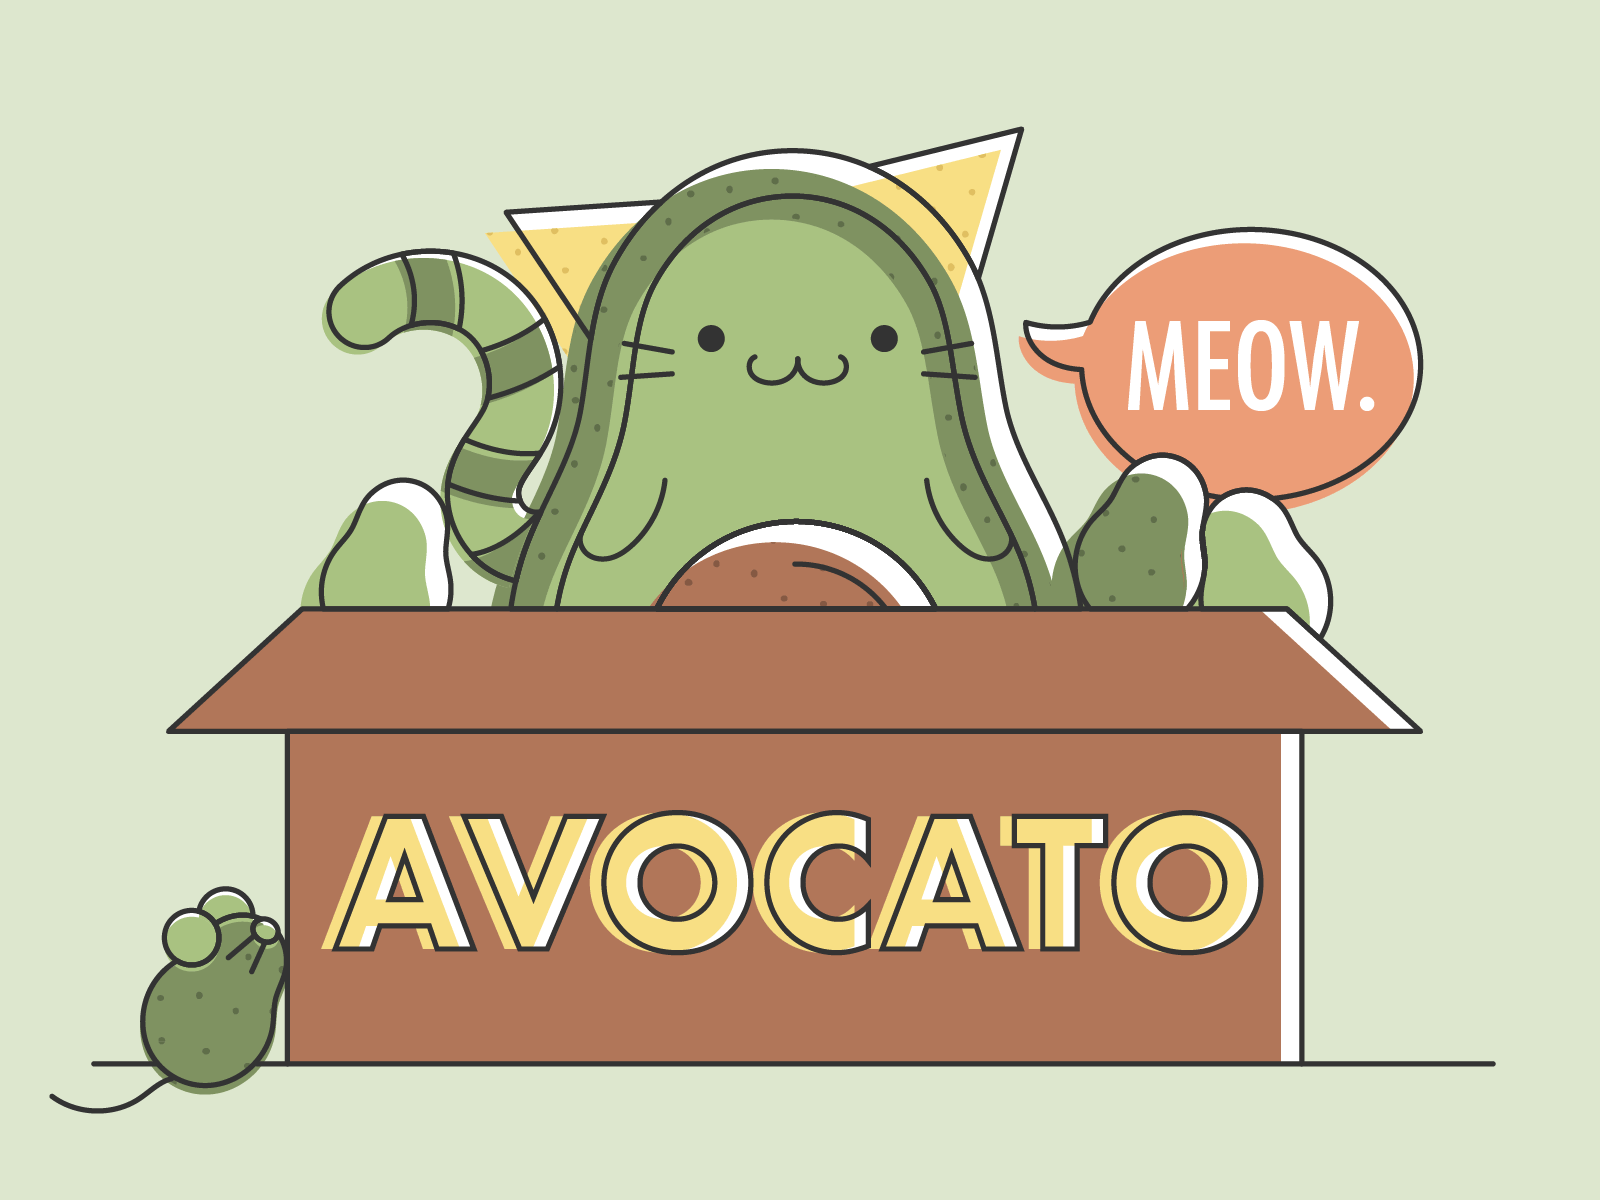 Avocadoodles 🥑 avocado avocato avocuddle character design chips cute elite greeting cards guacamole day illustration kawaii print puns queso salsa typography